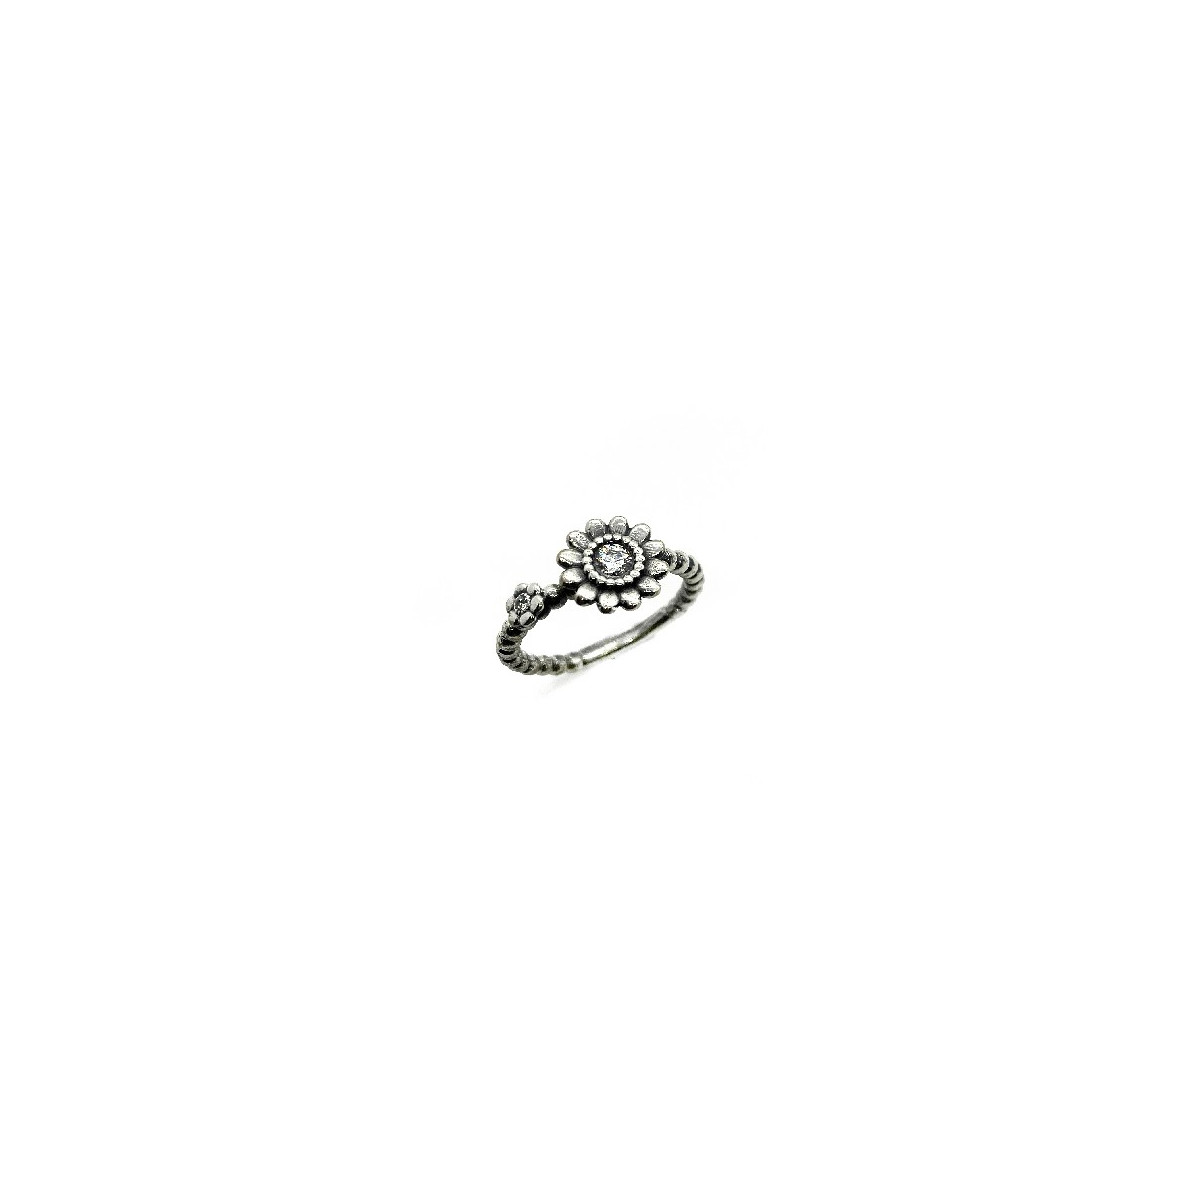 TOP SILVER FLOWERS RING - AN5709PPB